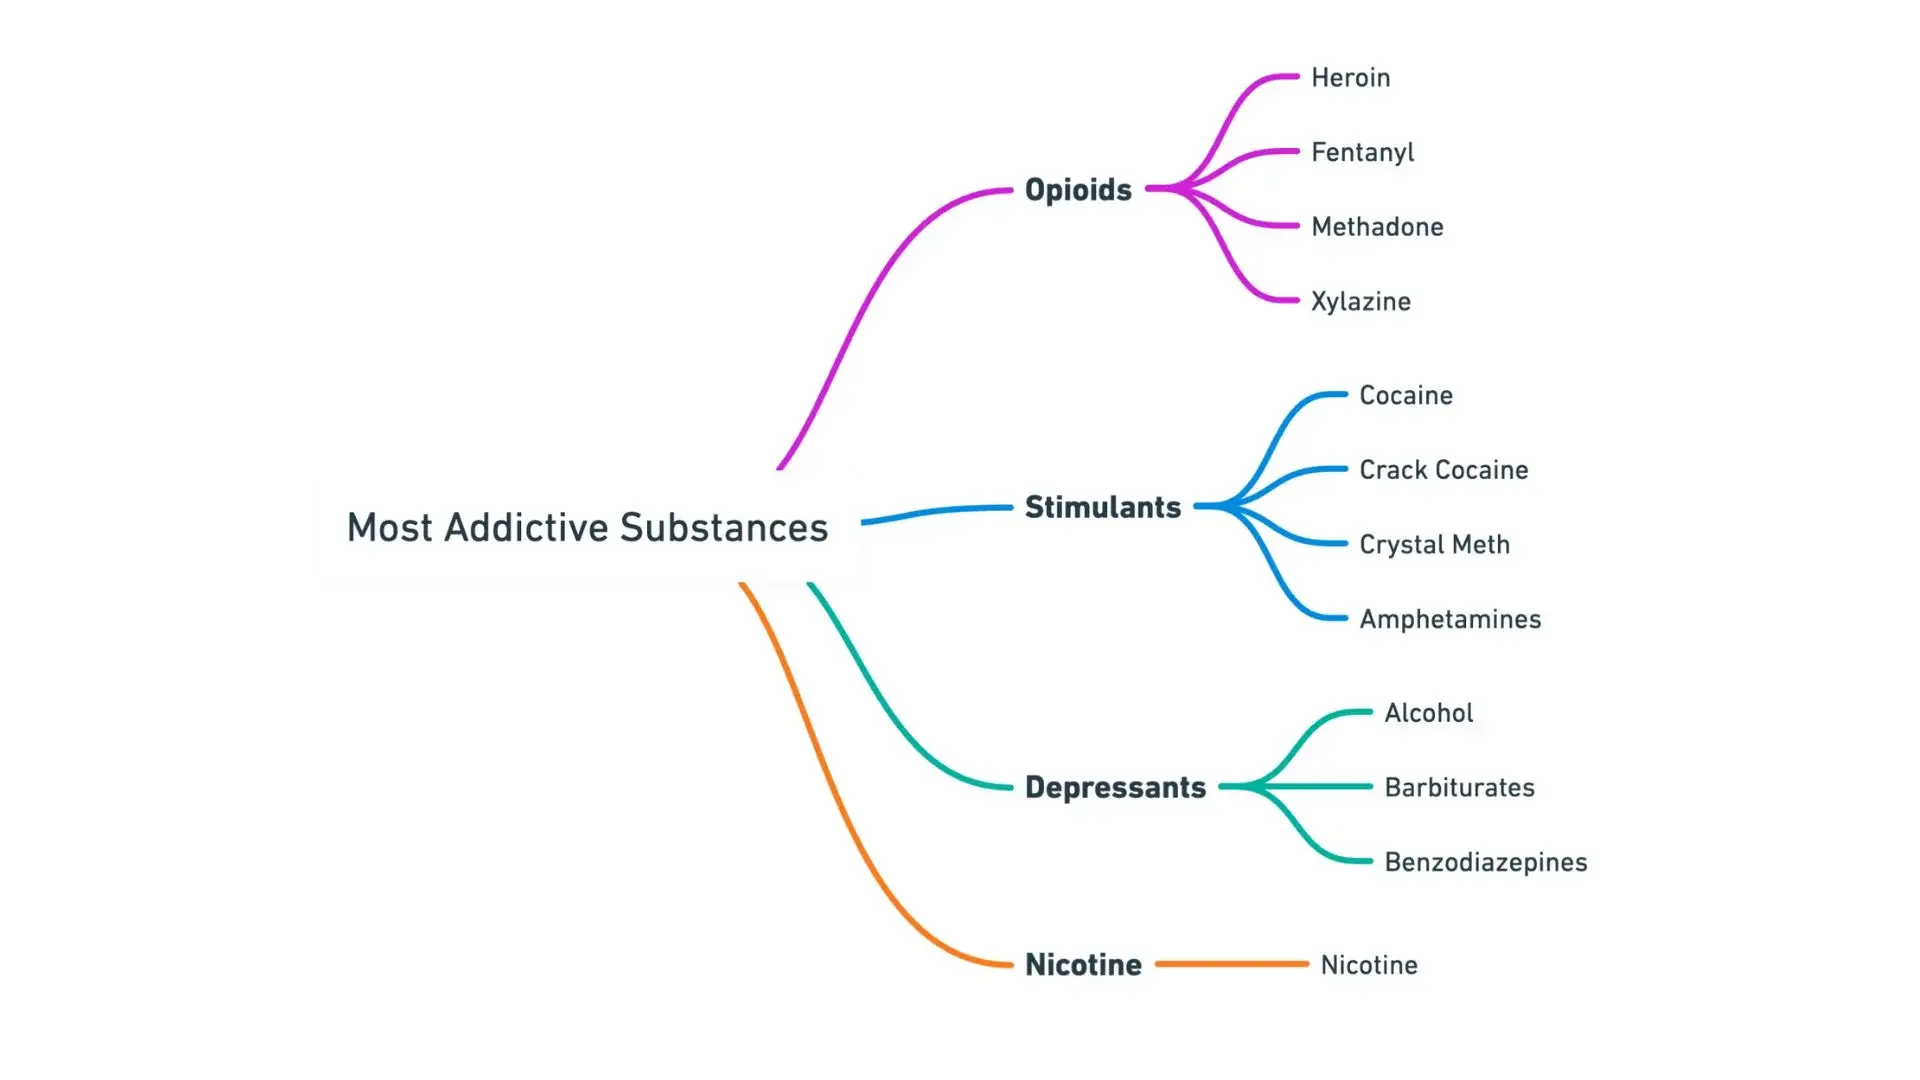 Mindmap illustrating the most addictive substances in different categories.